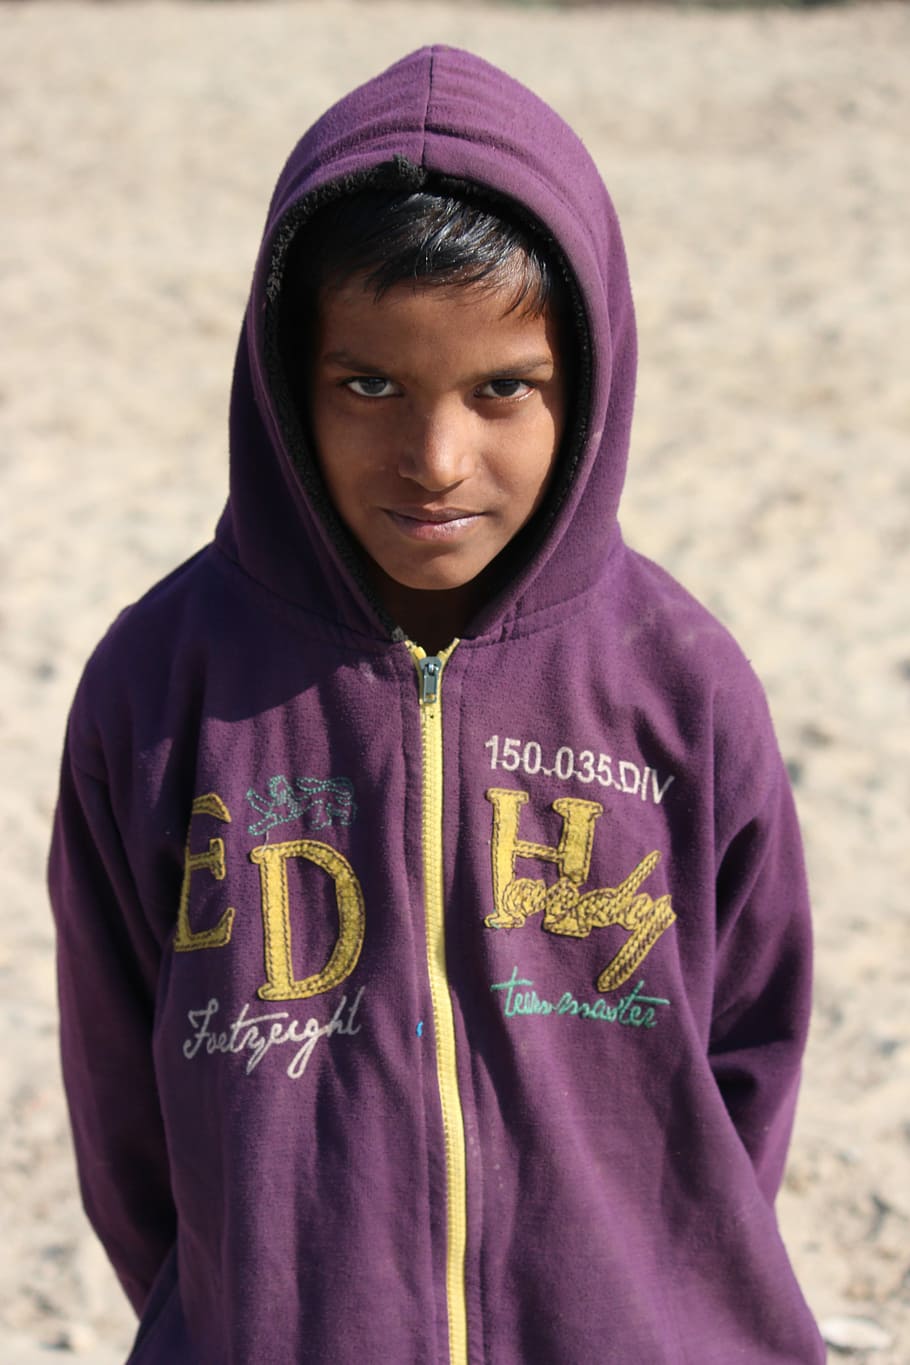 Poor, Child, Hungry, Food, baby, no food, sand, hood - clothing, one person, hooded shirt